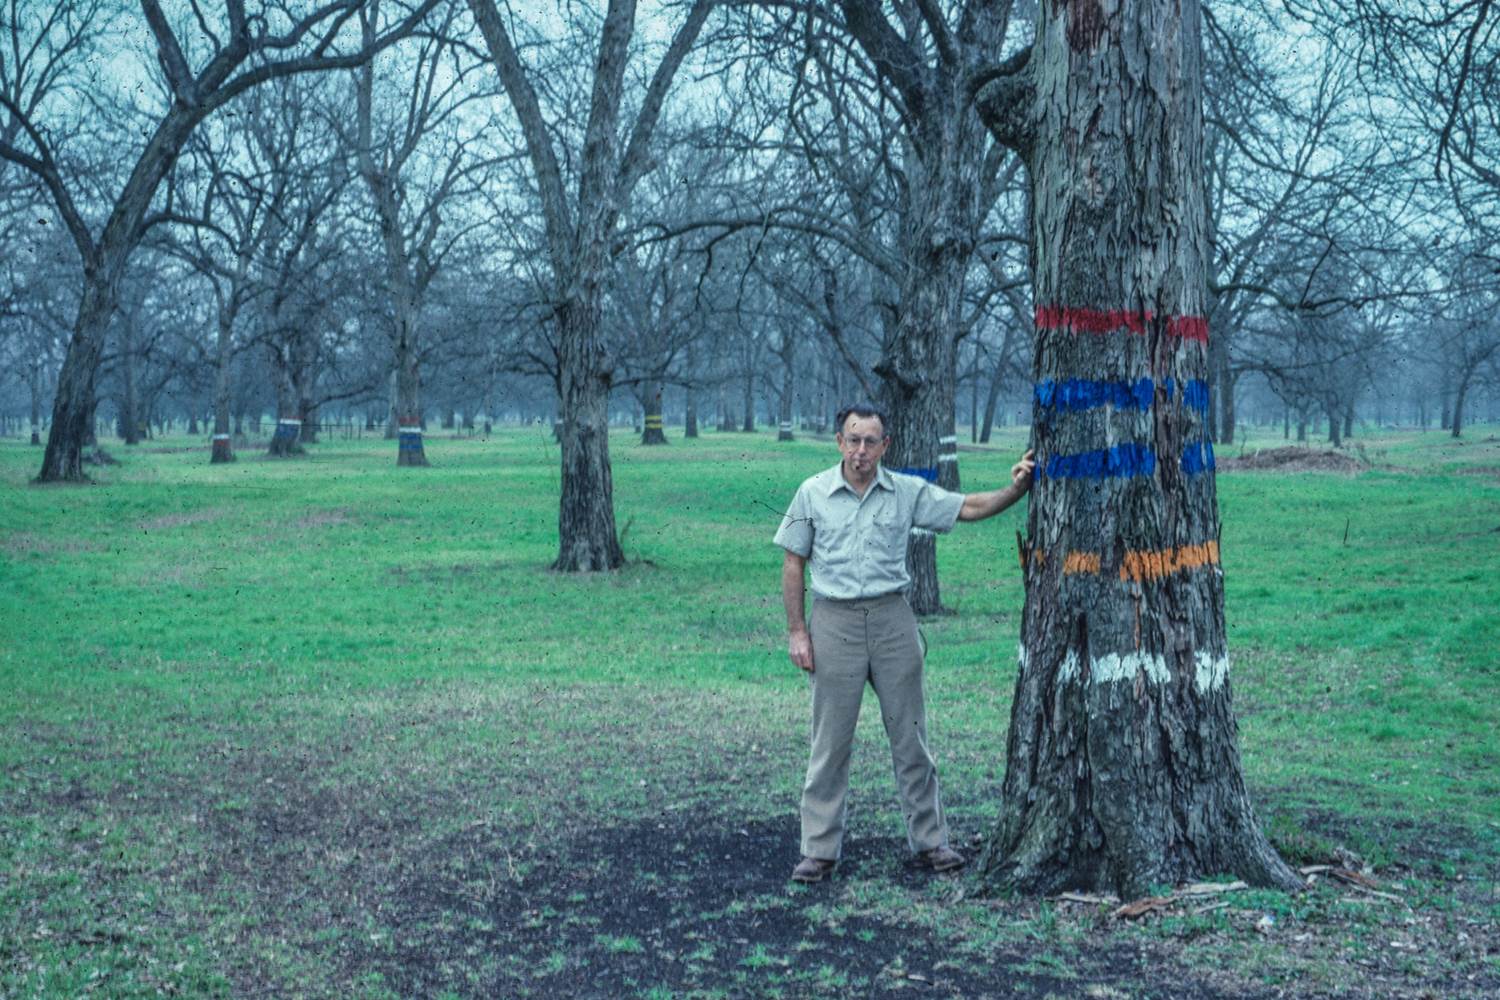 A man, Walter Williams, stands next to tall and mature pecan tree during winter. The tree has multiple lines in different colors painted in rows up its thick trunk.